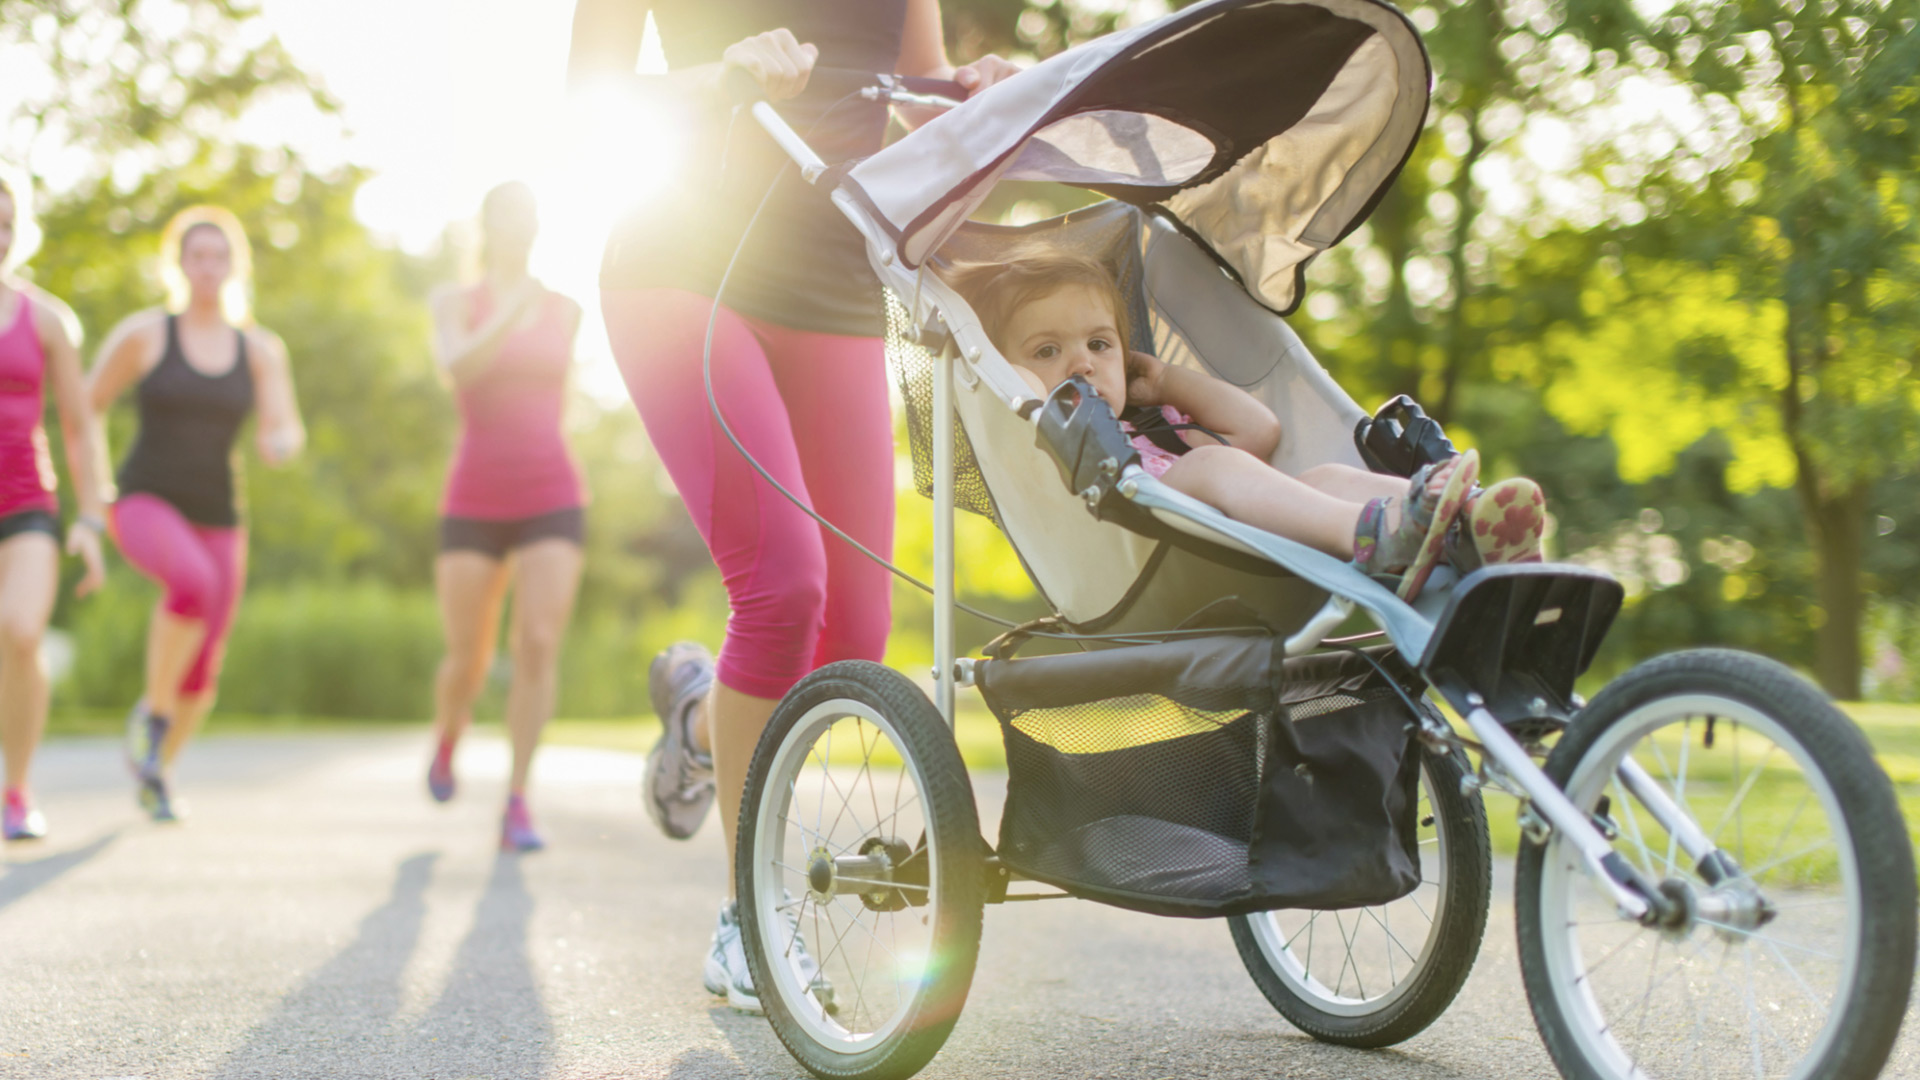 Woman jogging with stroller getting daily exercise